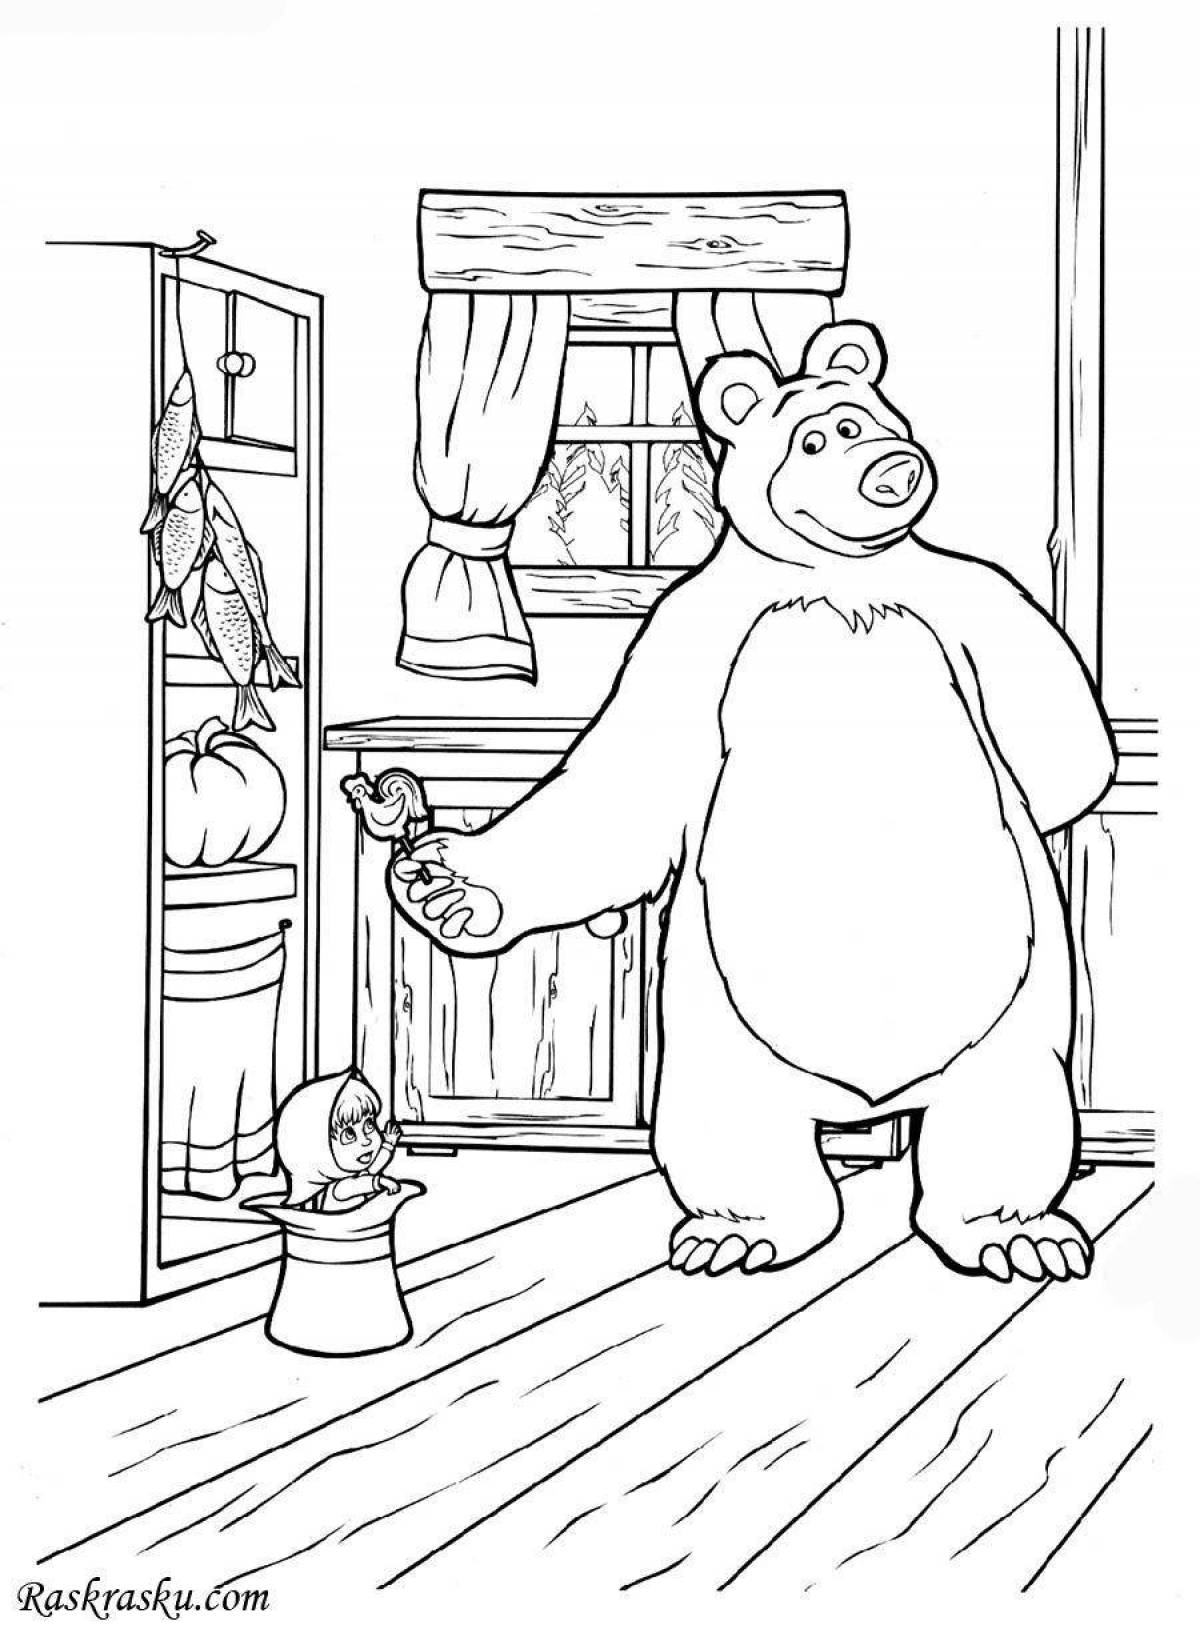 Bright Masha and the bear deluxe coloring book